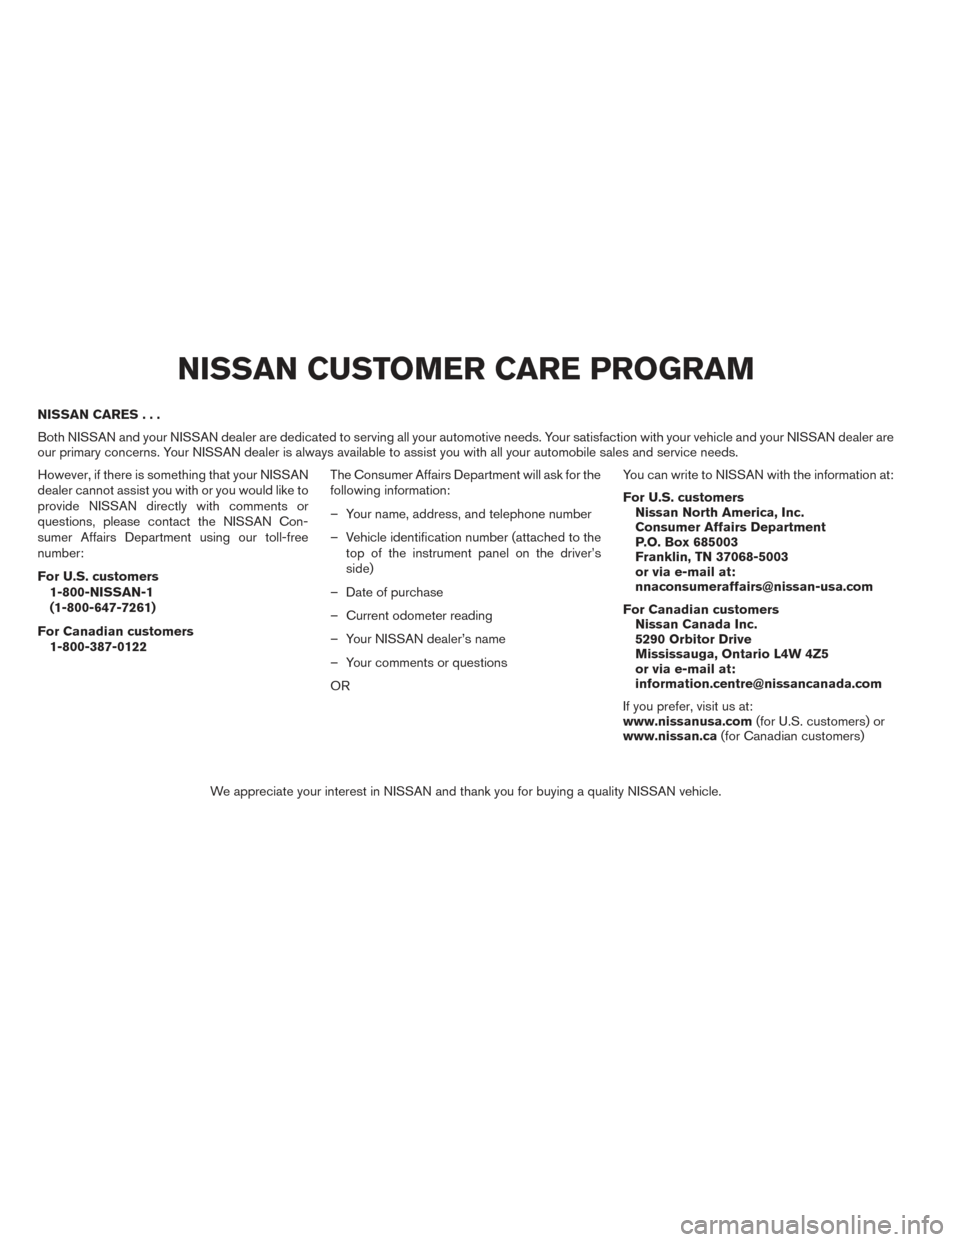 NISSAN PATHFINDER 2014 R52 / 4.G Owners Manual NISSAN CARES...
Both NISSAN and your NISSAN dealer are dedicated to serving all your automotive needs. Your satisfaction with your vehicle and your NISSAN dealer are
our primary concerns. Your NISSAN 